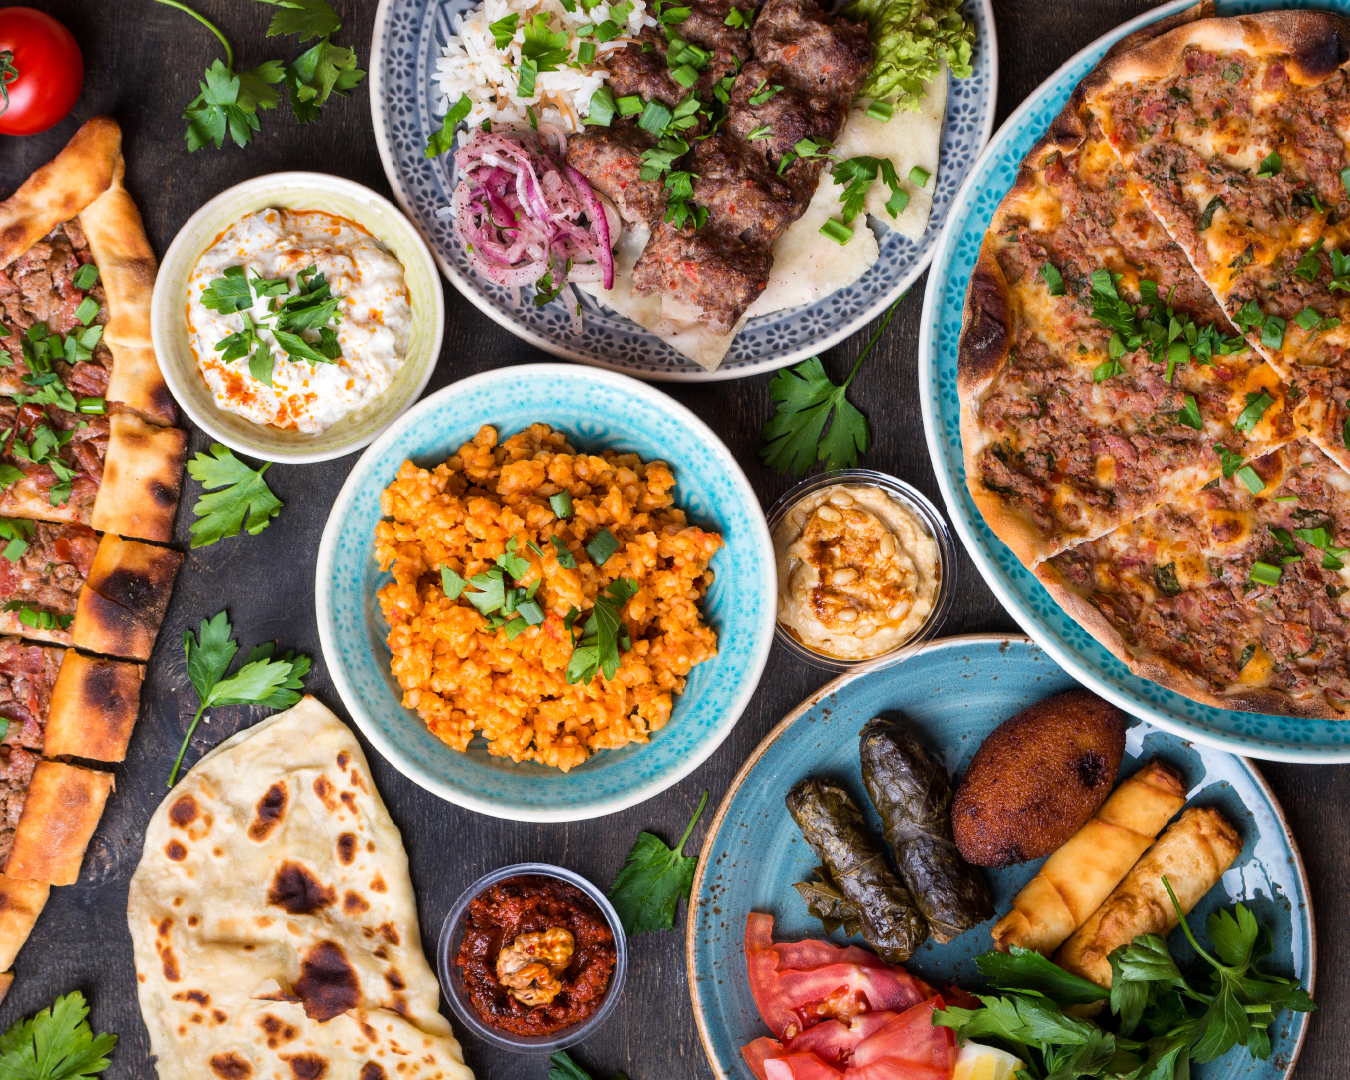 7 Middle Eastern and Qatari restaurants to try this Ramadan